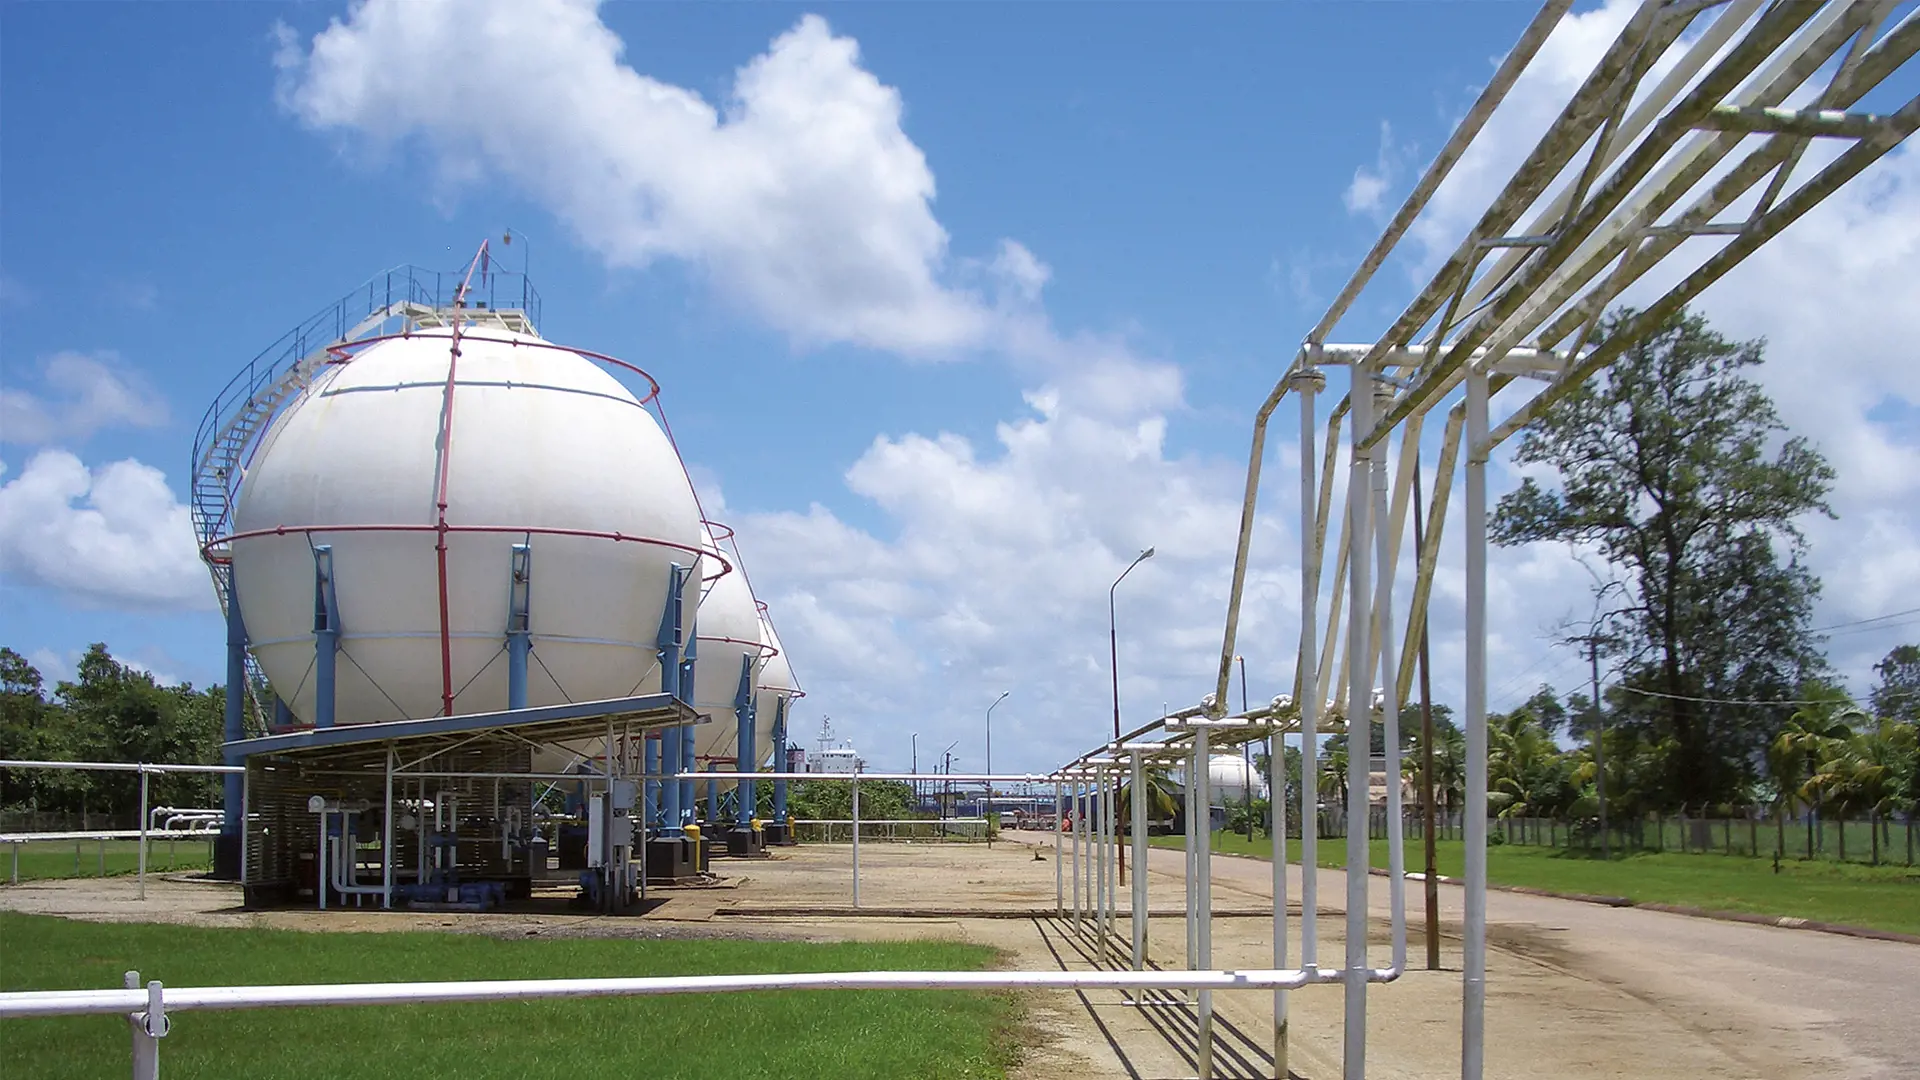 image of an spherical lpg tank and pipelines